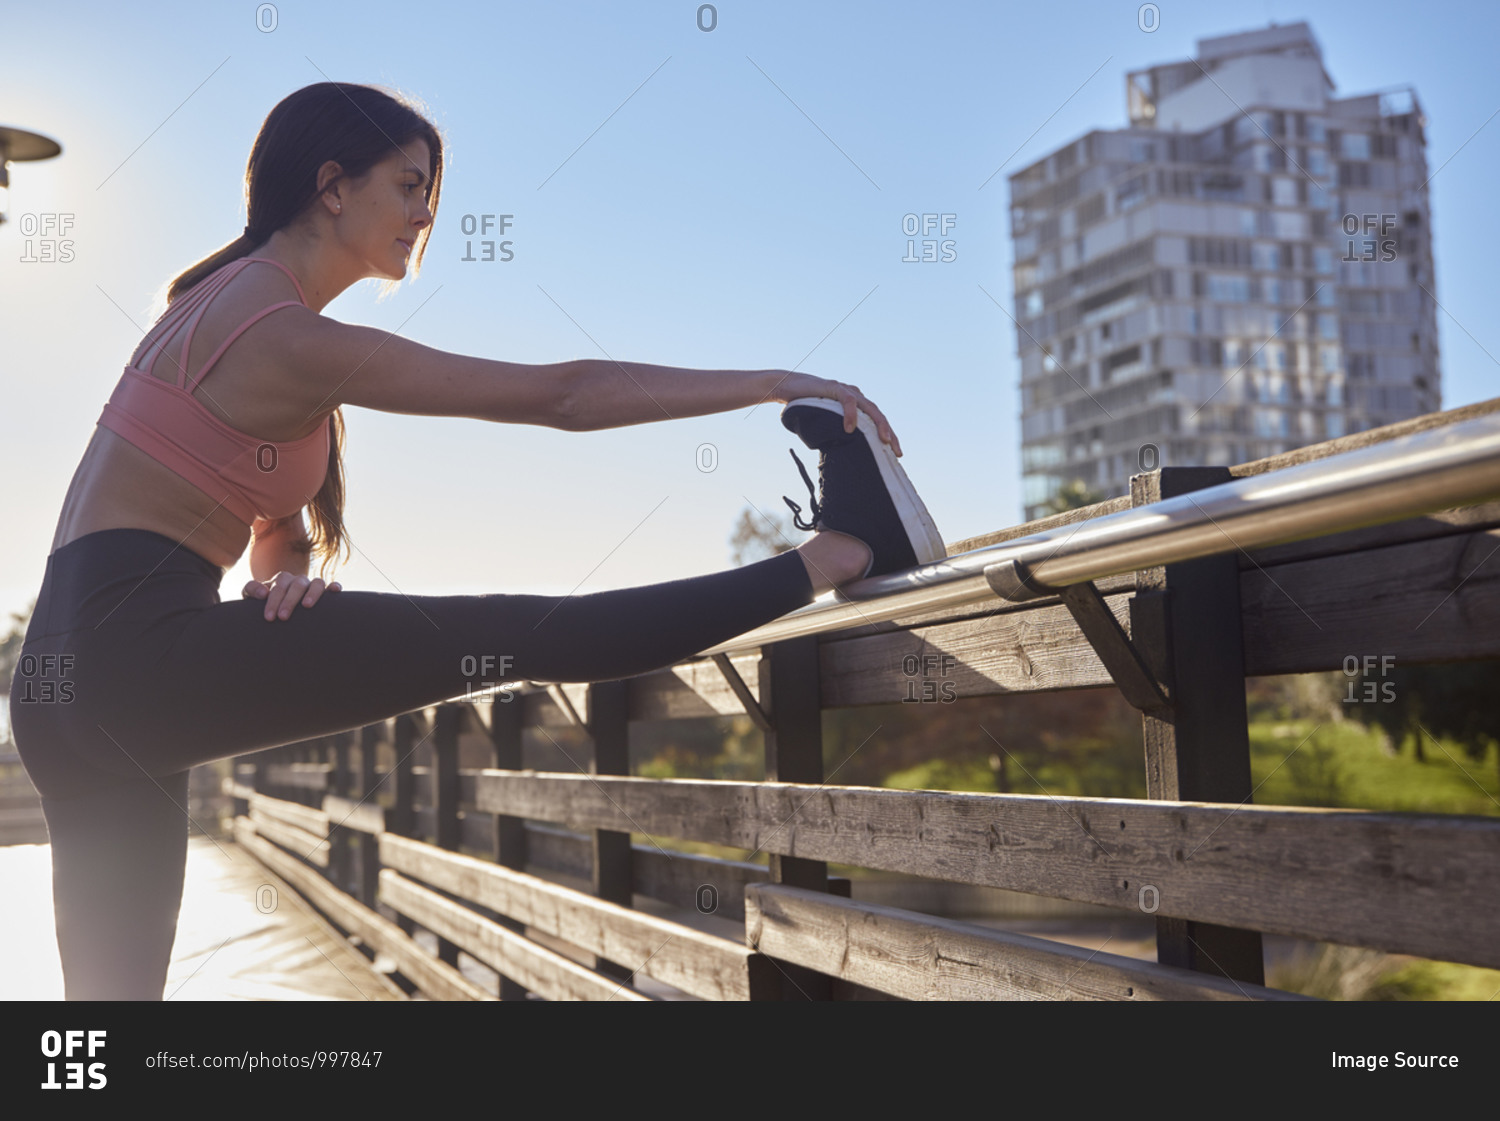 Woman stretching in city park, Barcelona, Catalonia, Spain